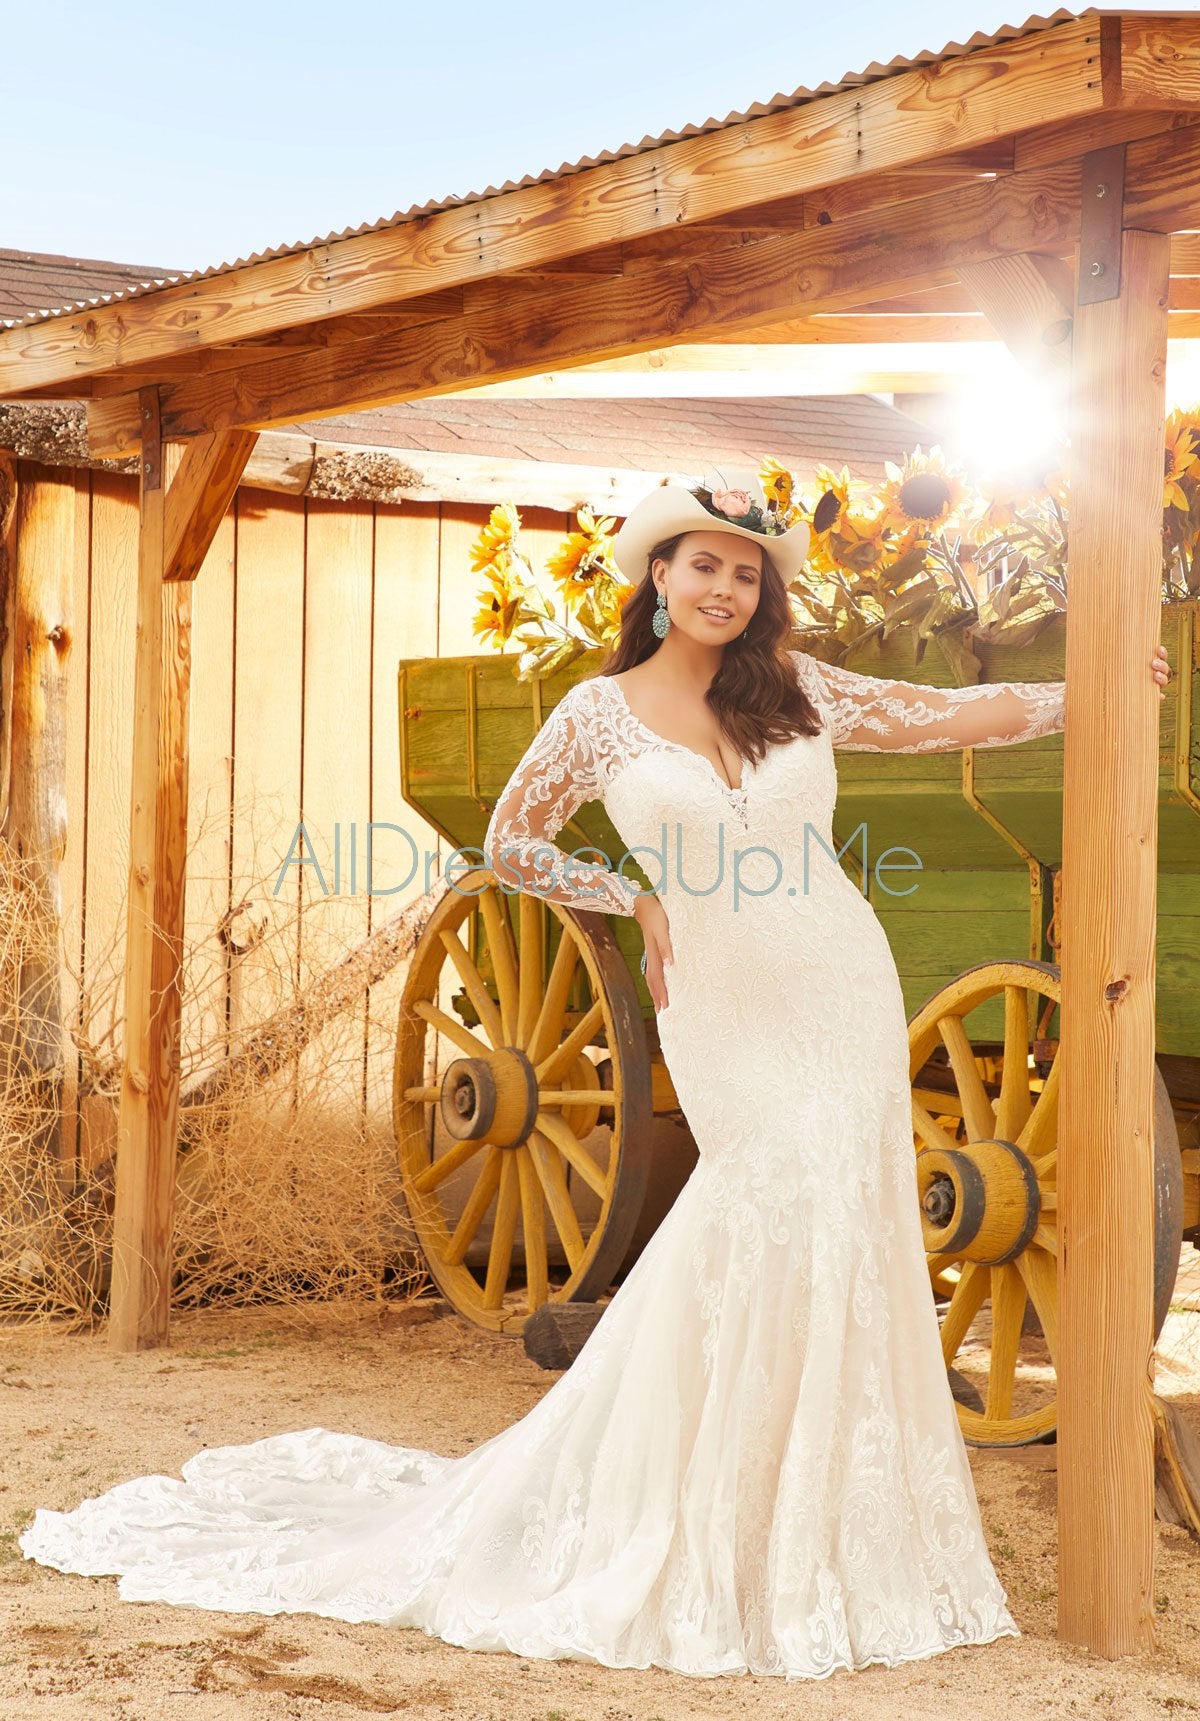 Julietta - Ripley - 3263 - Cheron's Bridal, Wedding Gown - Morilee Julietta - - Wedding Gowns Dresses Chattanooga Hixson Shops Boutiques Tennessee TN Georgia GA MSRP Lowest Prices Sale Discount